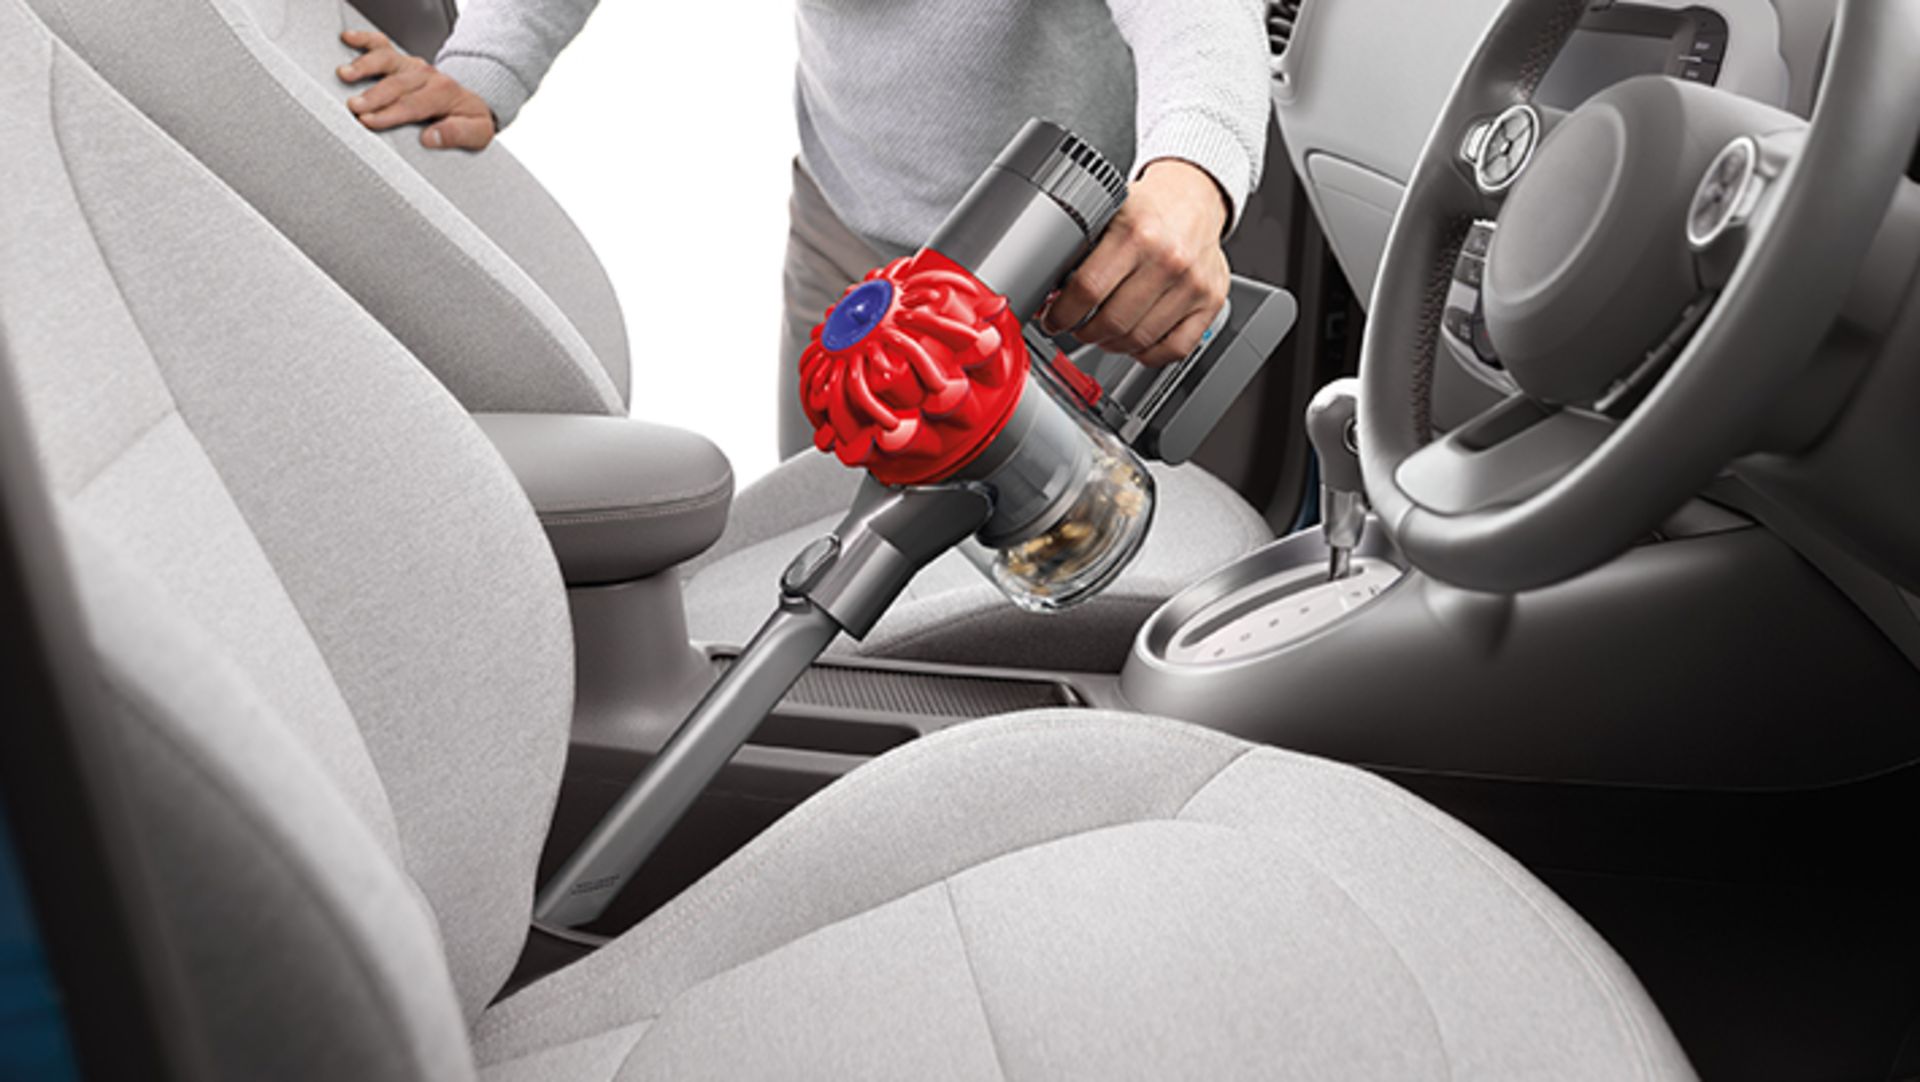 V *TRADE QTY* Brand New Dyson V6 Handheld Vacuum Cleaner with Car and Boat Accessory Set - - Bild 5 aus 7